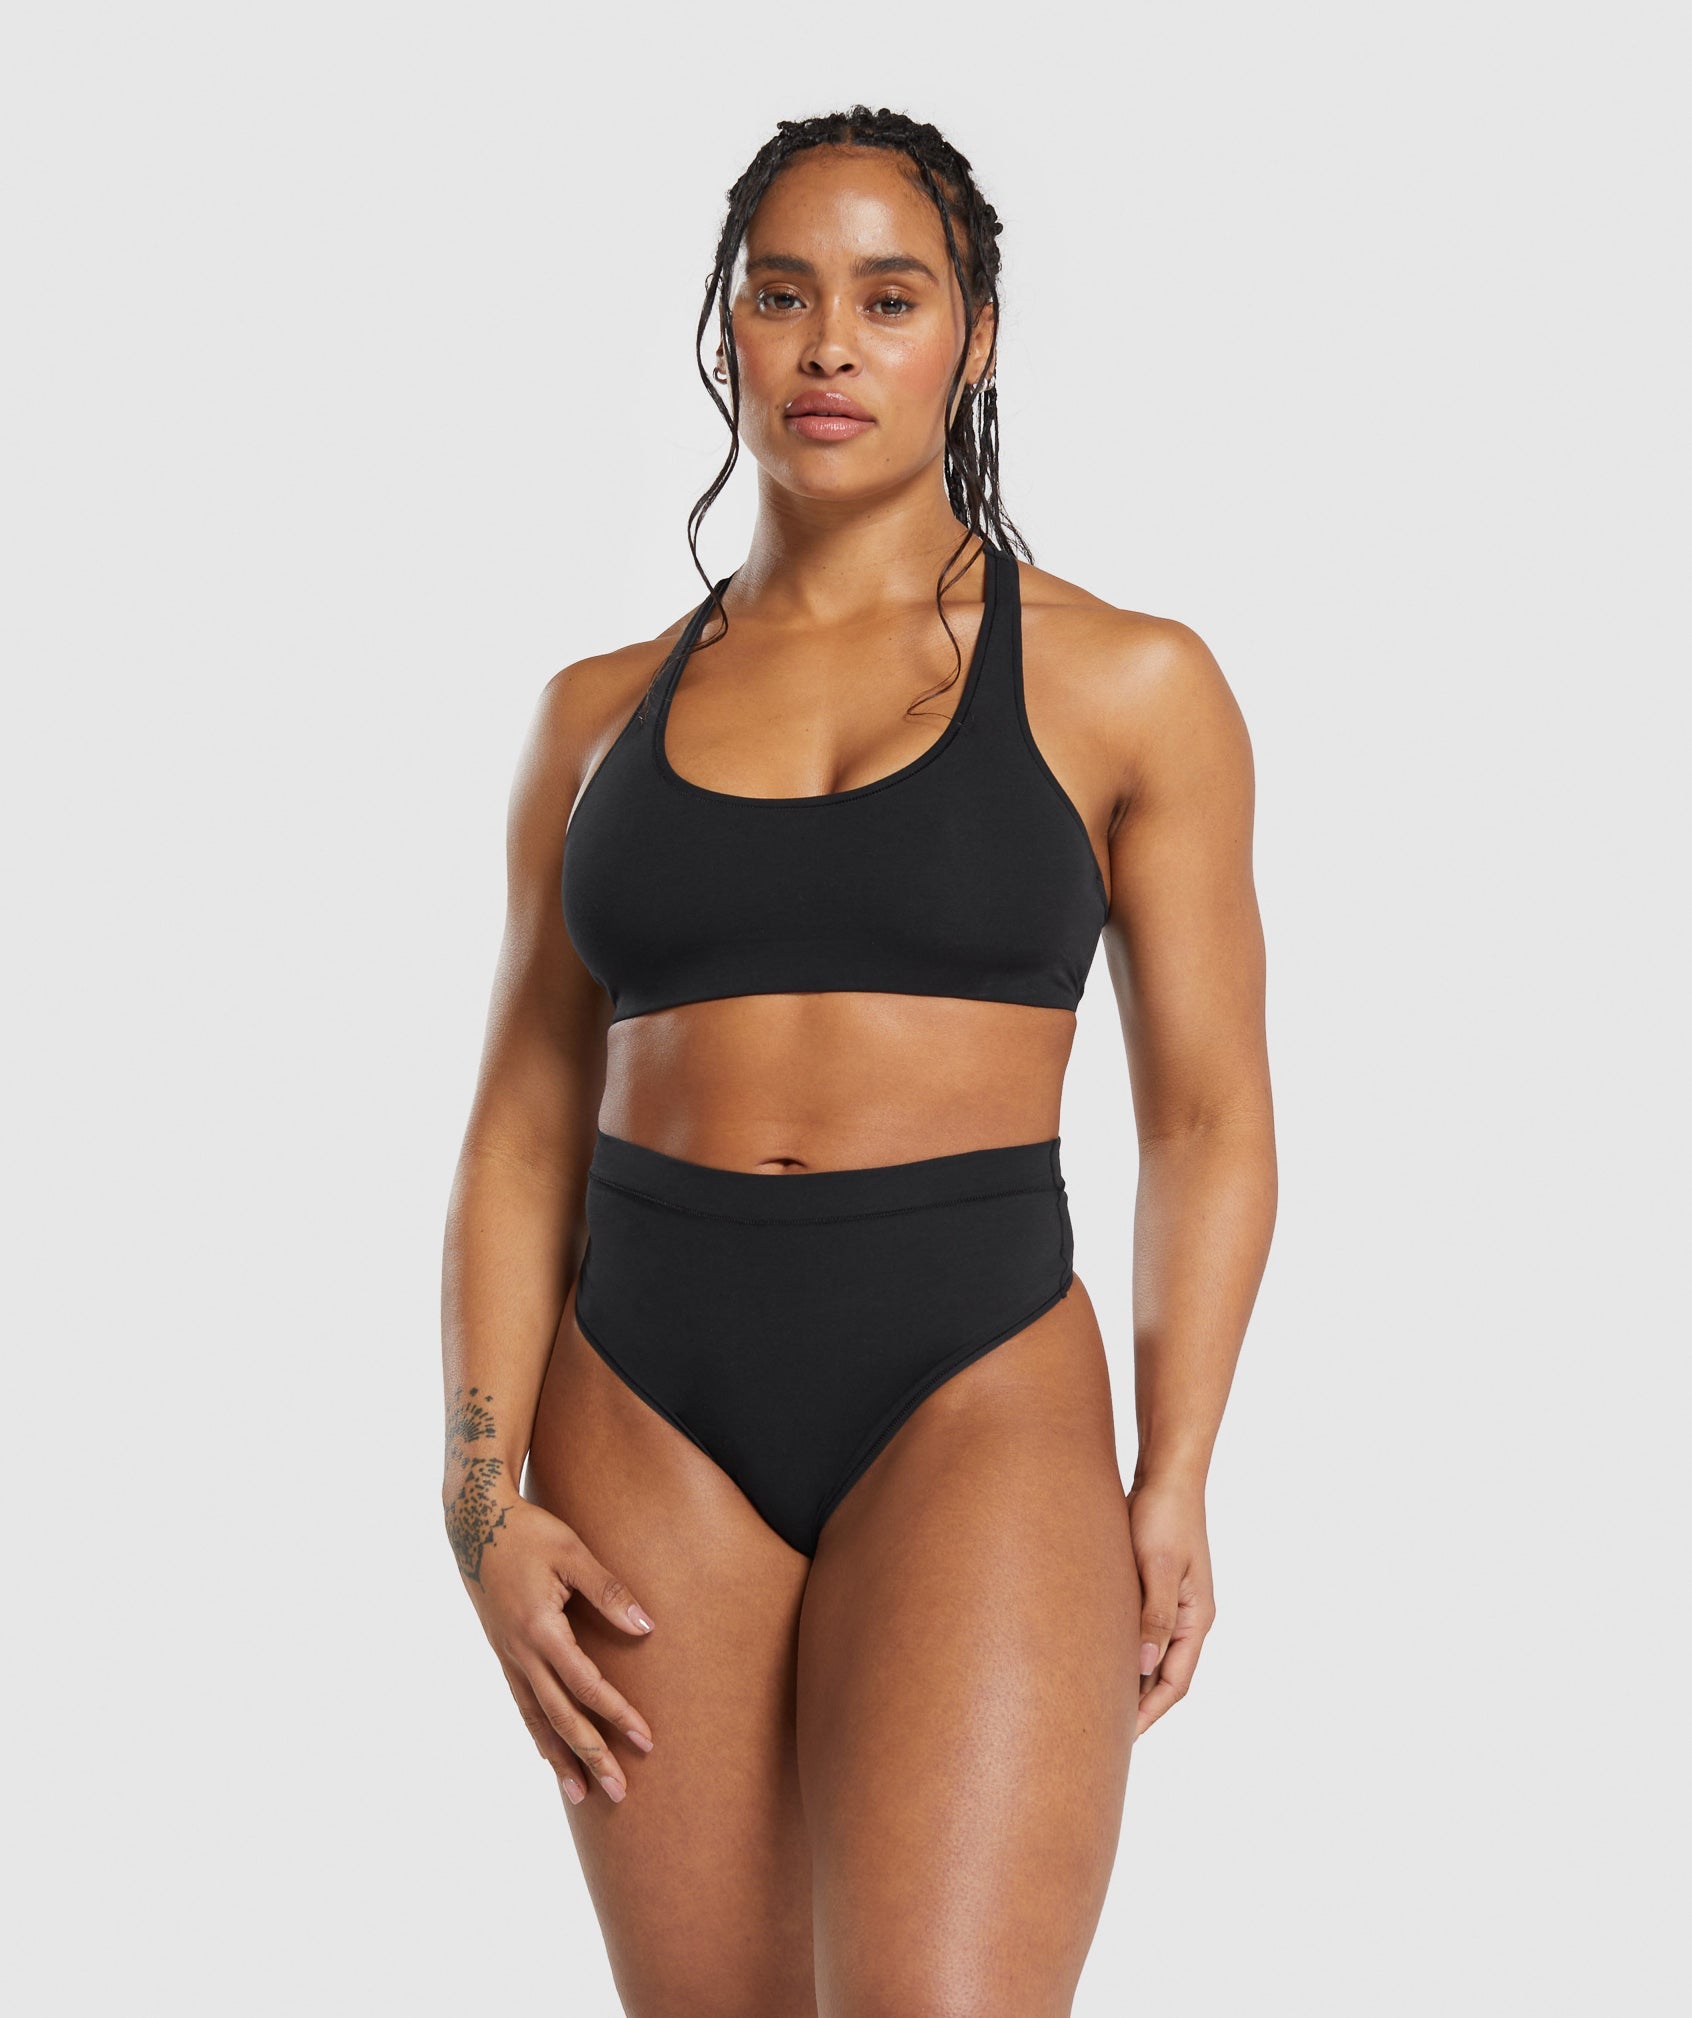 Gymshark Women's Essential Cotton Thong, Black, Small